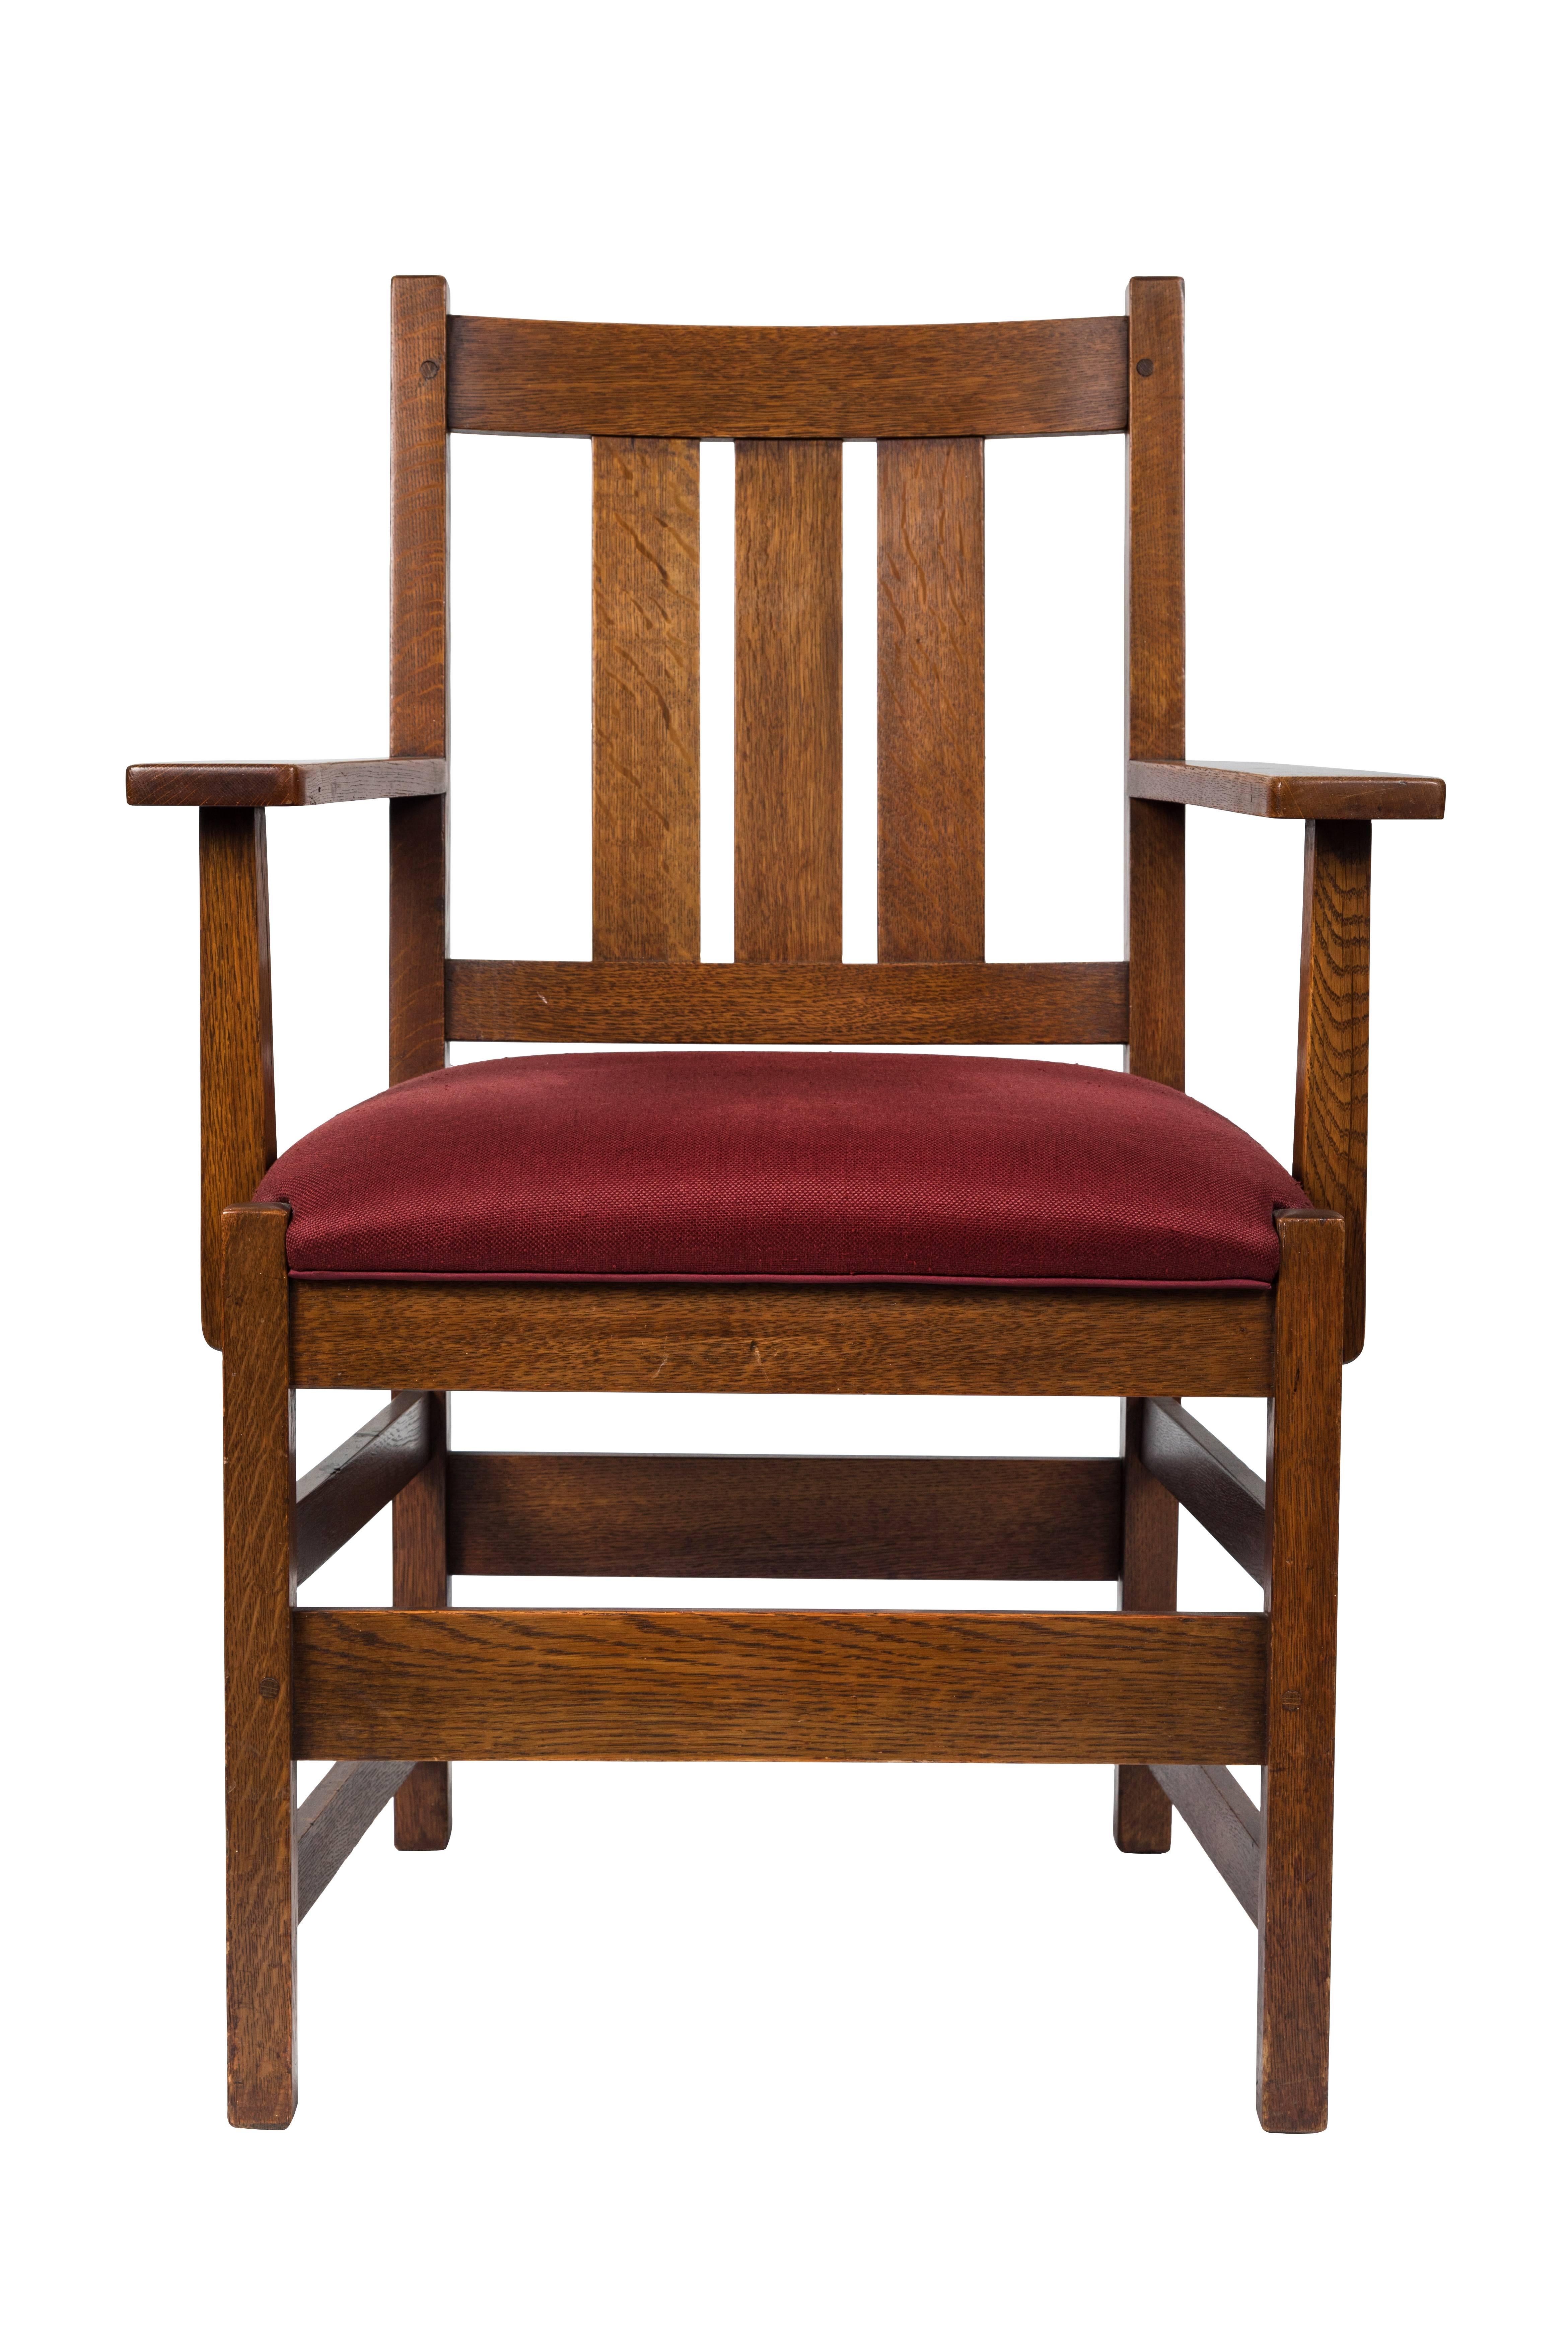 Two different but similar oak armchairs by L. & J.G. Stickley. Signed. Newly reupholstered in cranberry red linen, American, circa 1910. 

Measures: One chair is 18 in. D x 26.25 in. W x 37.5 in. H x 19.5 in. SH x 26.5 in. AH. 

Second chair is